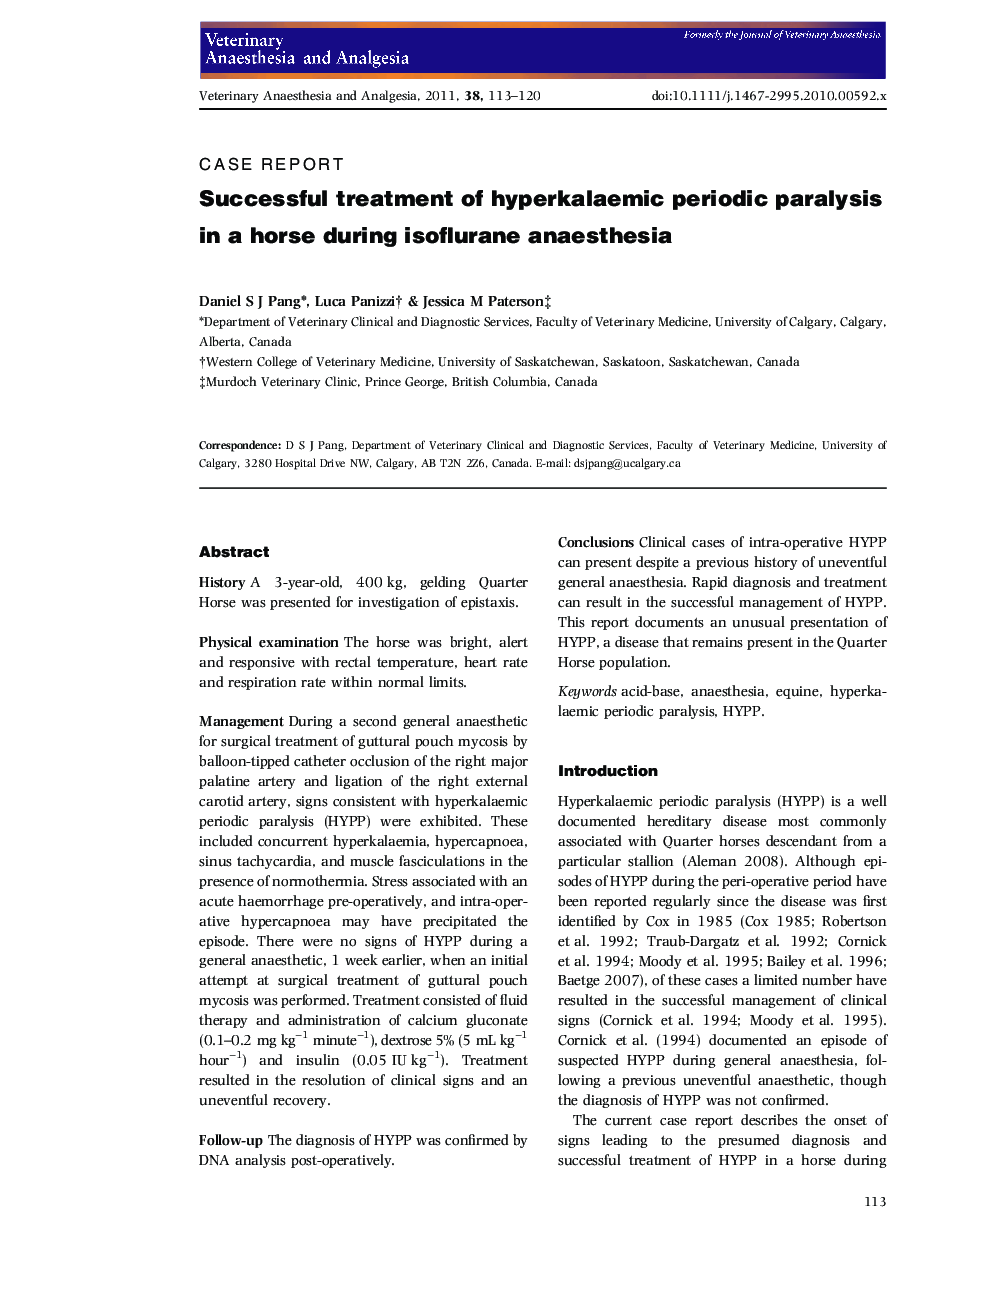 Successful treatment of hyperkalaemic periodic paralysis in a horse during isoflurane anaesthesia